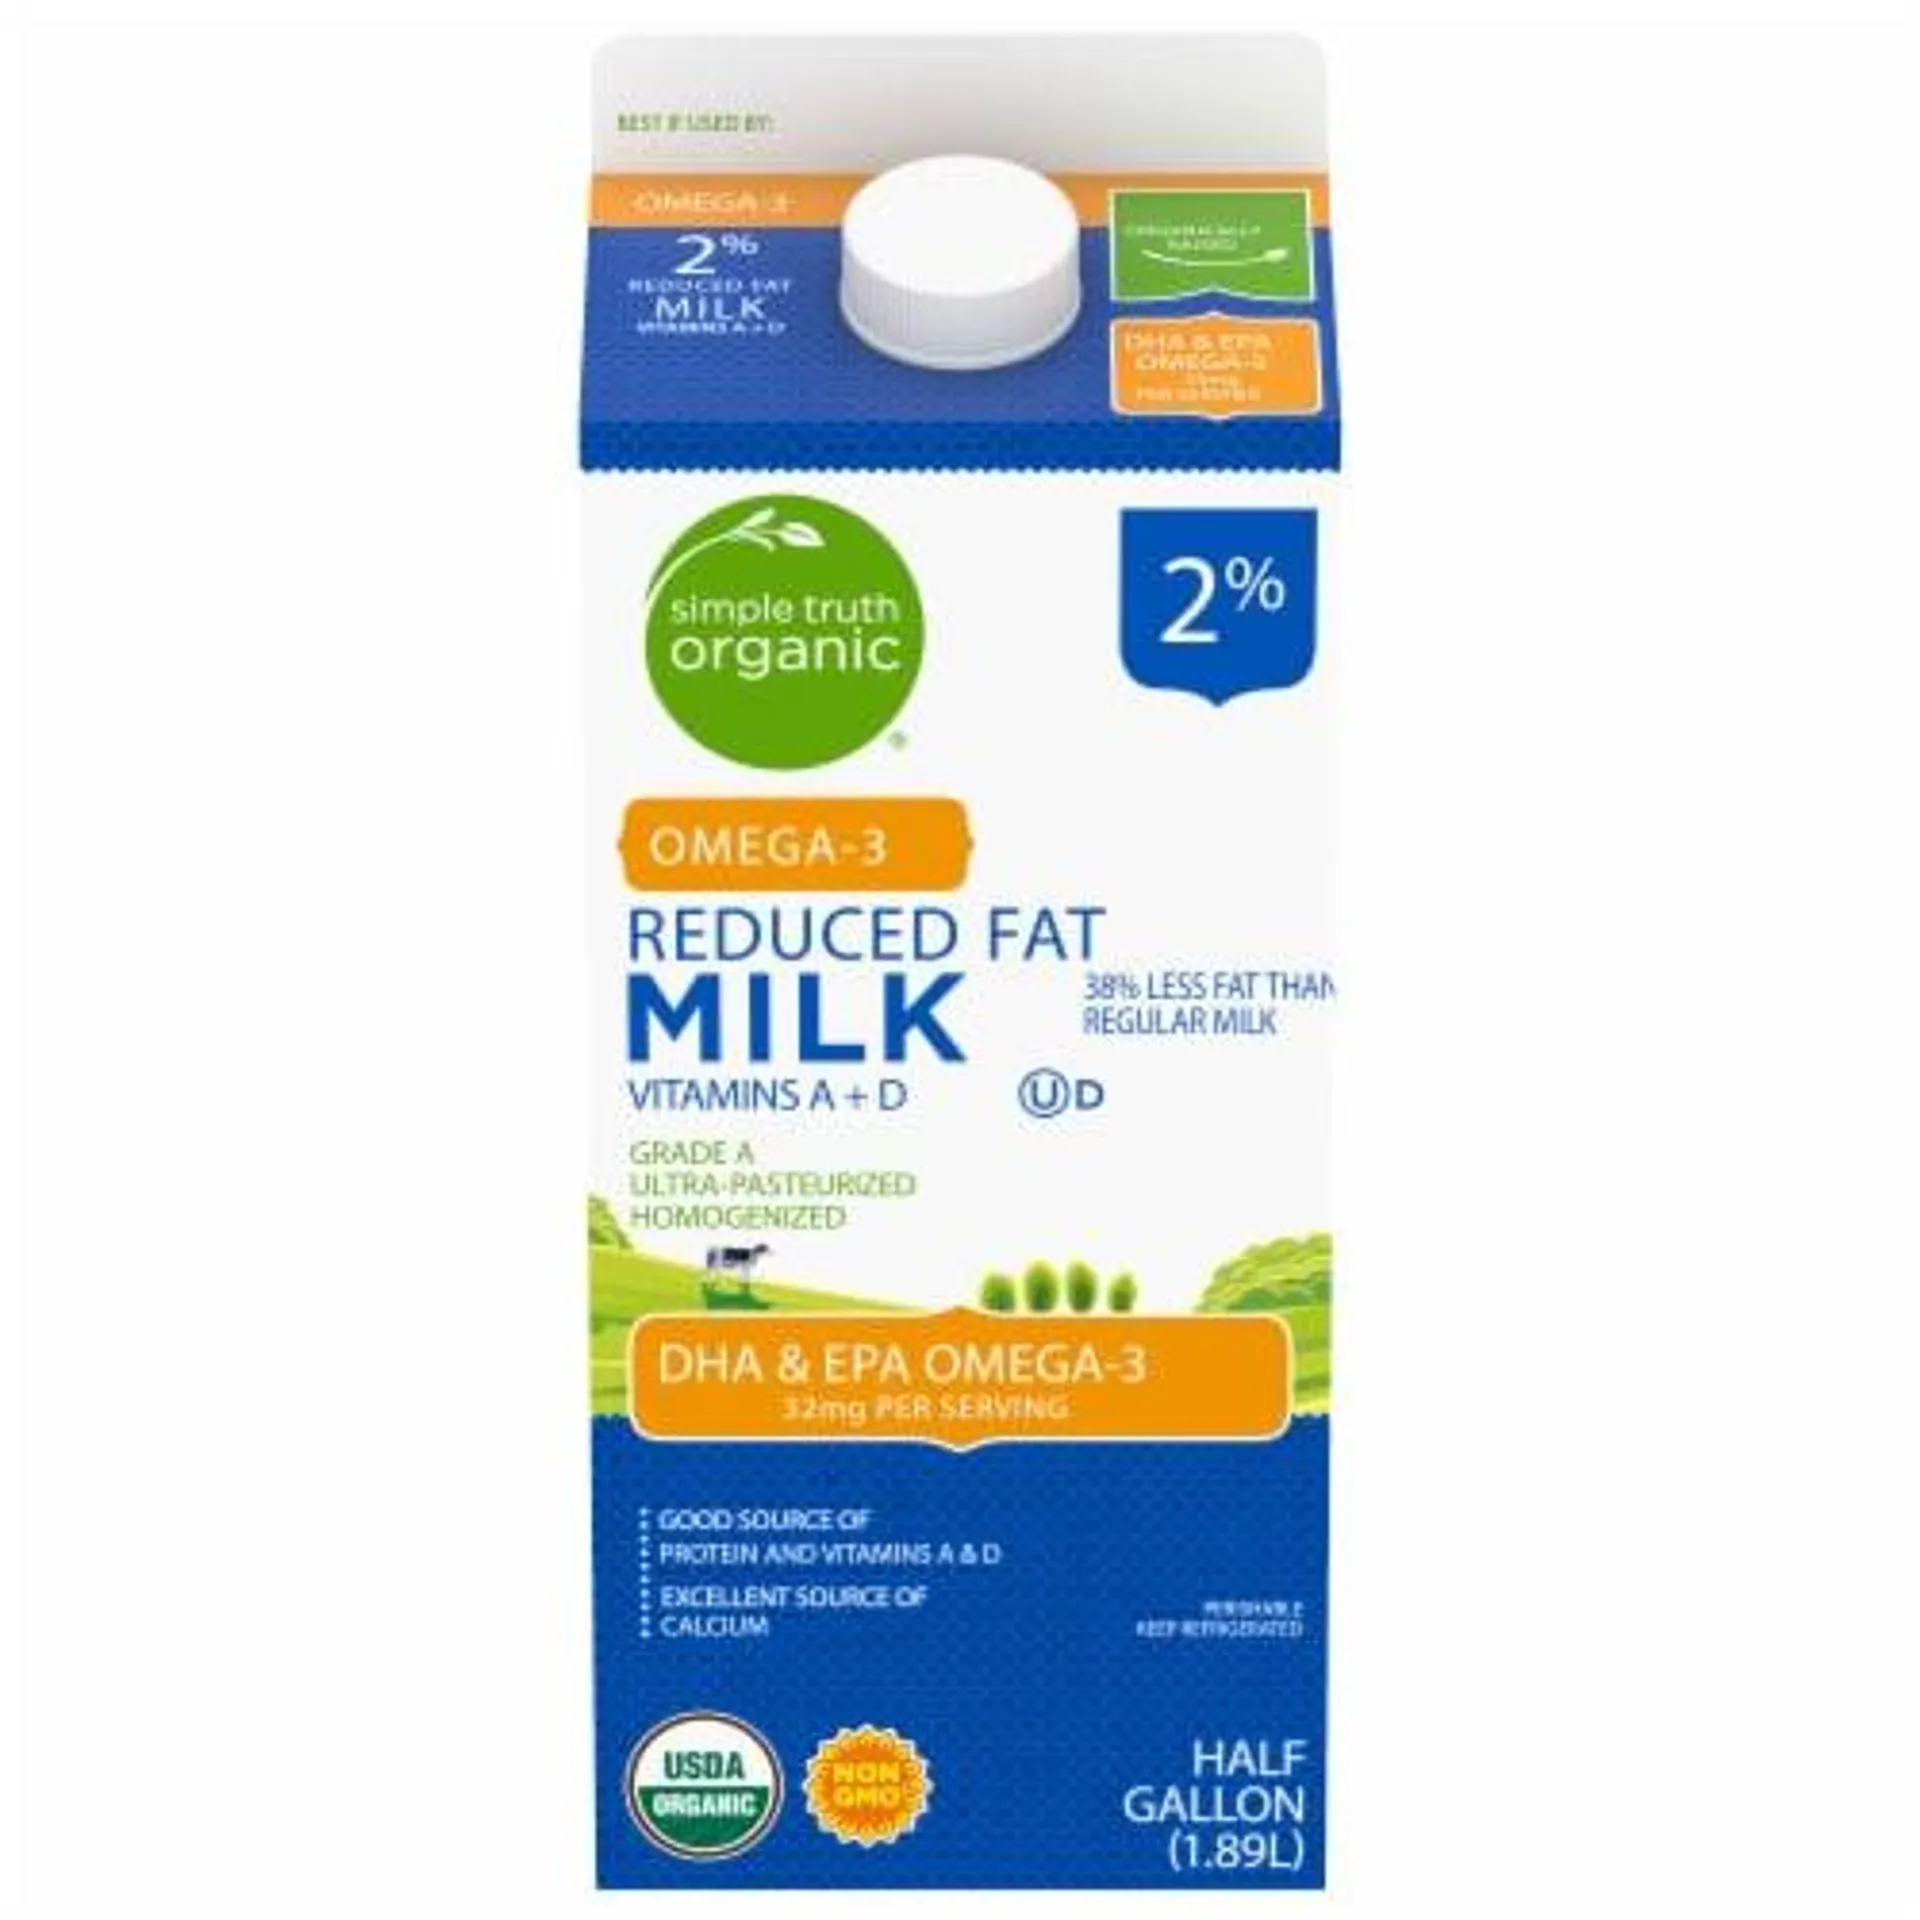 Simple Truth Organic™ 2% Reduced Fat Milk with DHA Omega-3